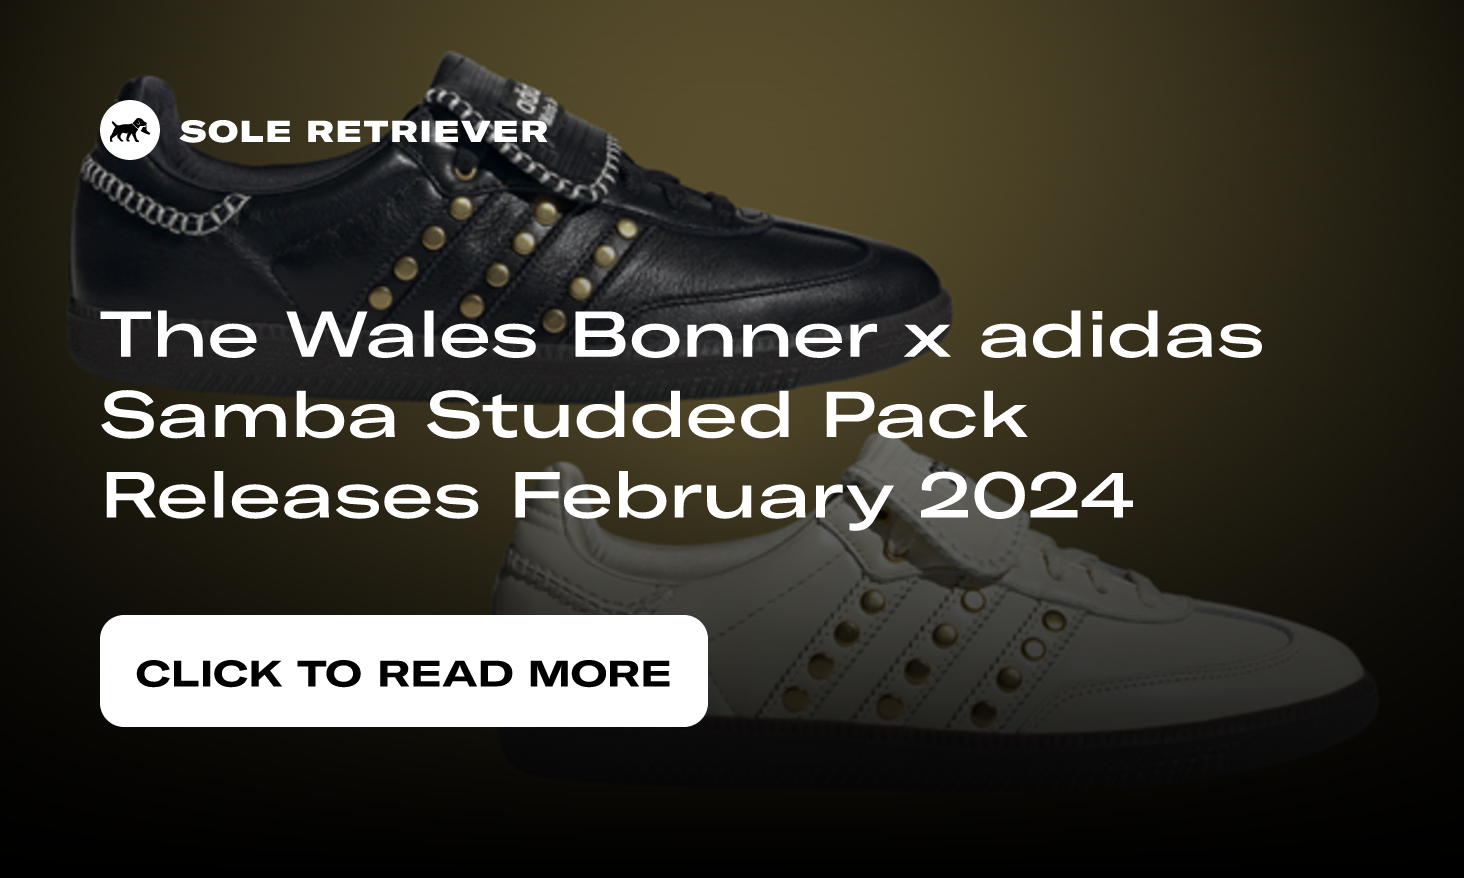 The Wales Bonner x adidas Samba Studded Pack Releases February 2024